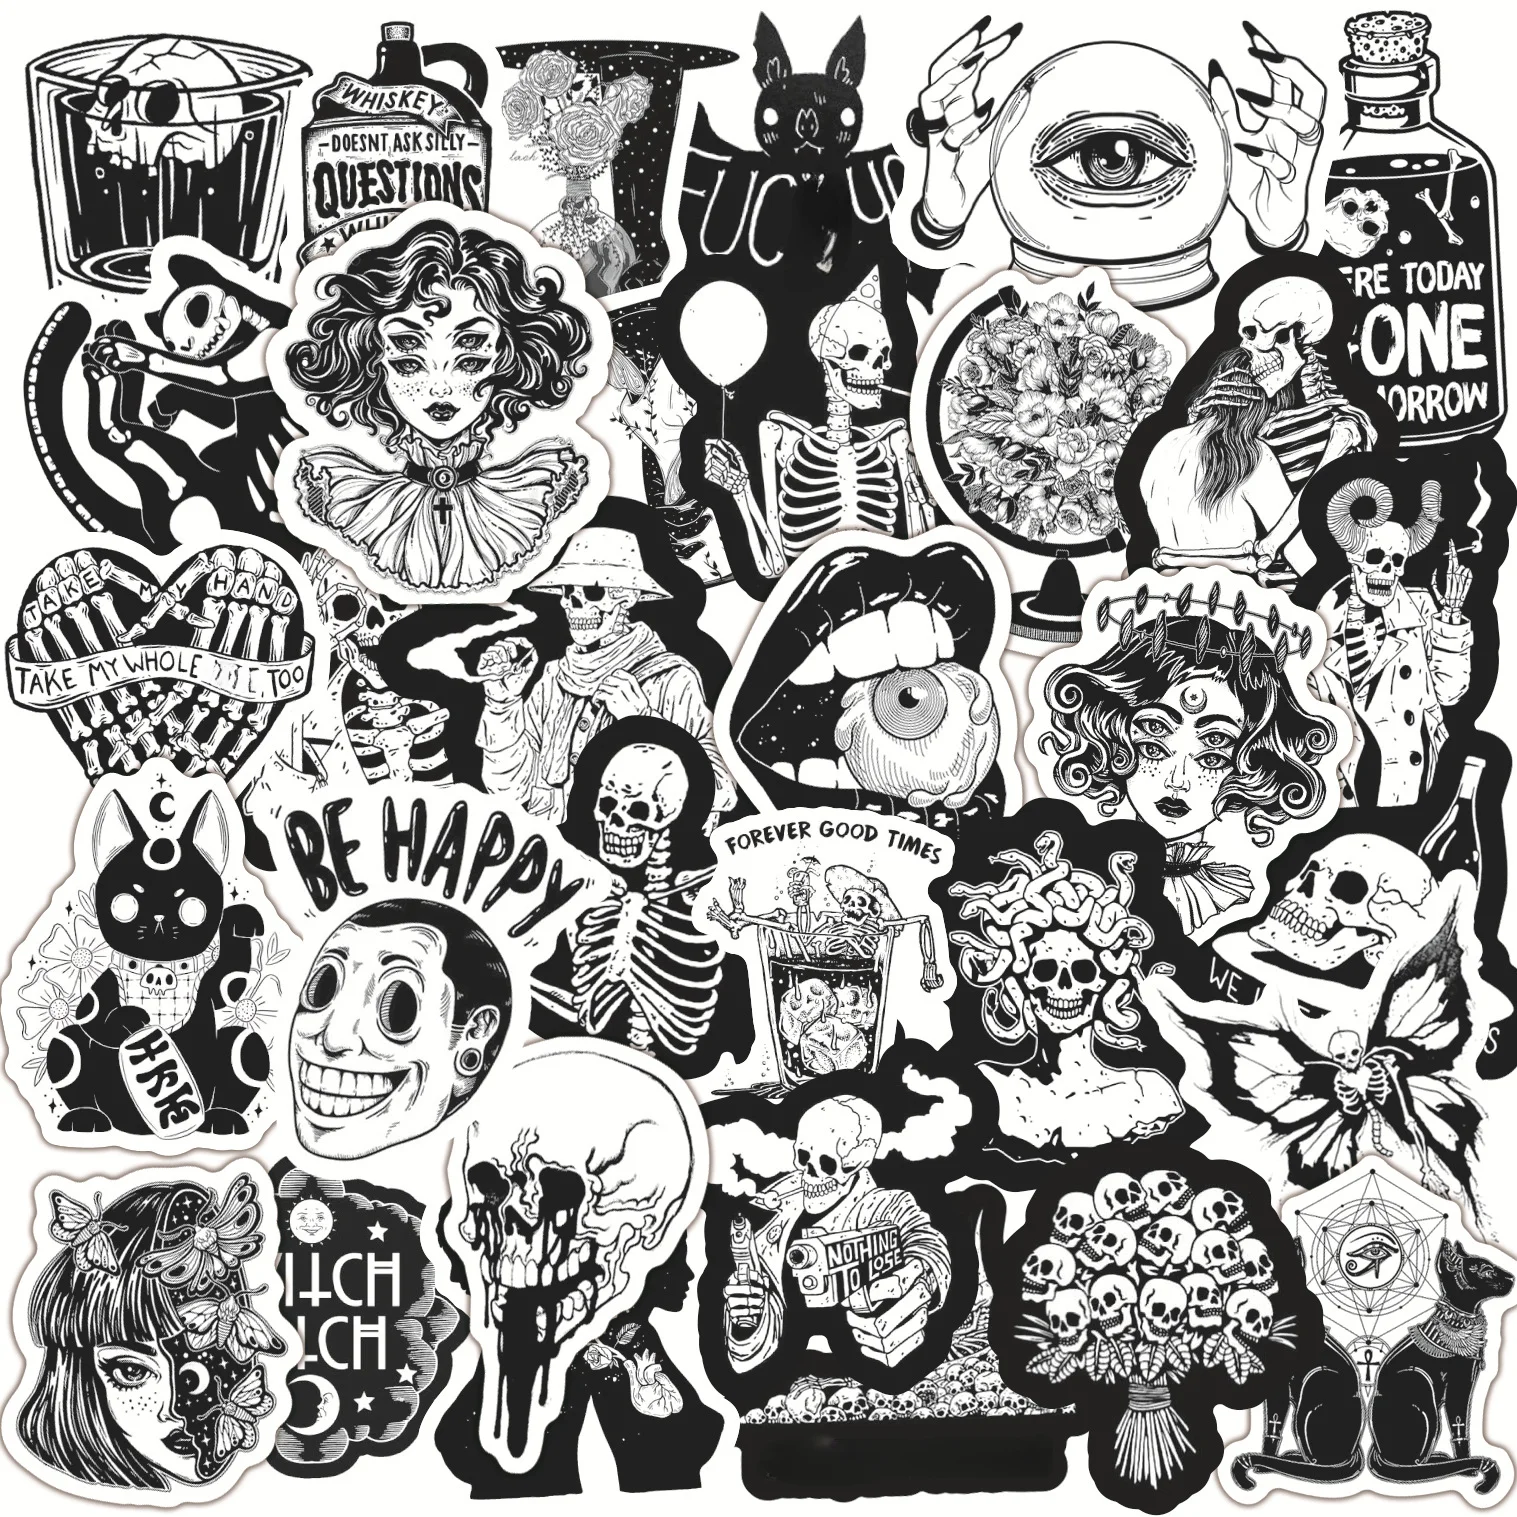 100PCS Mixed Black White Gothic Stickers Graffiti Motorcycle Skateboard Travel Phone Case Decal Toys Sticker Waterproof 10 30 50pcs black and white horror punk gothic pattern graffiti sticker suitcase notebook skateboard sticker toy wholesale